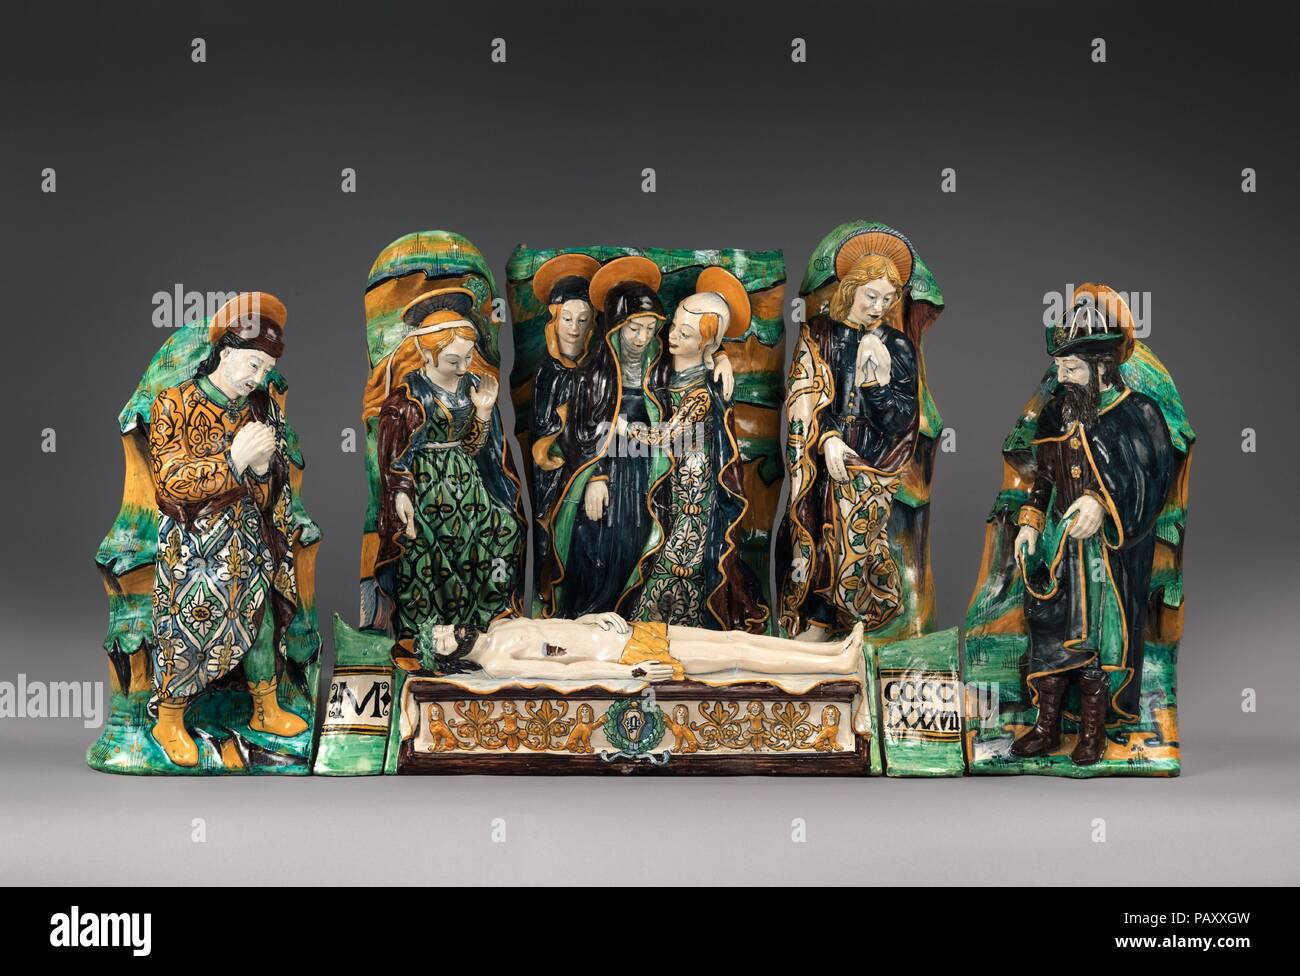 Sculptural group with The Lamentation Over the Dead Christ. Culture: Eastern Central Italian, Emilia-Romagna or the Marche. Dimensions: Overall: 29 1/2 x 64 x 12in. (74.9 x 162.6 x 30.5cm);  (a) confirmed: 9 1/8 × 28 5/8 × 6 3/4 in., 30.3 lb. (23.2 × 72.7 × 17.1 cm, 13.7 kg);  (b) confirmed: 27 3/4 in., 54.1 lb. (70.5 cm, 24.5 kg);  (c) confirmed: 28 5/8 in., 31.9 lb. (72.7 cm, 14.4 kg);  (d) confirmed: 29 1/4 in., 33.9 lb. (74.3 cm, 15.4 kg);  (e) confirmed: 27 1/2 in., 32.9 lb. (69.9 cm, 14.9 kg);  (f) confirmed: 28 5/8 in., 36 lb. (72.7 cm, 16.4 kg);  (g) confirmed: 8 5/8 in. (21.9 cm)  (h) Stock Photo